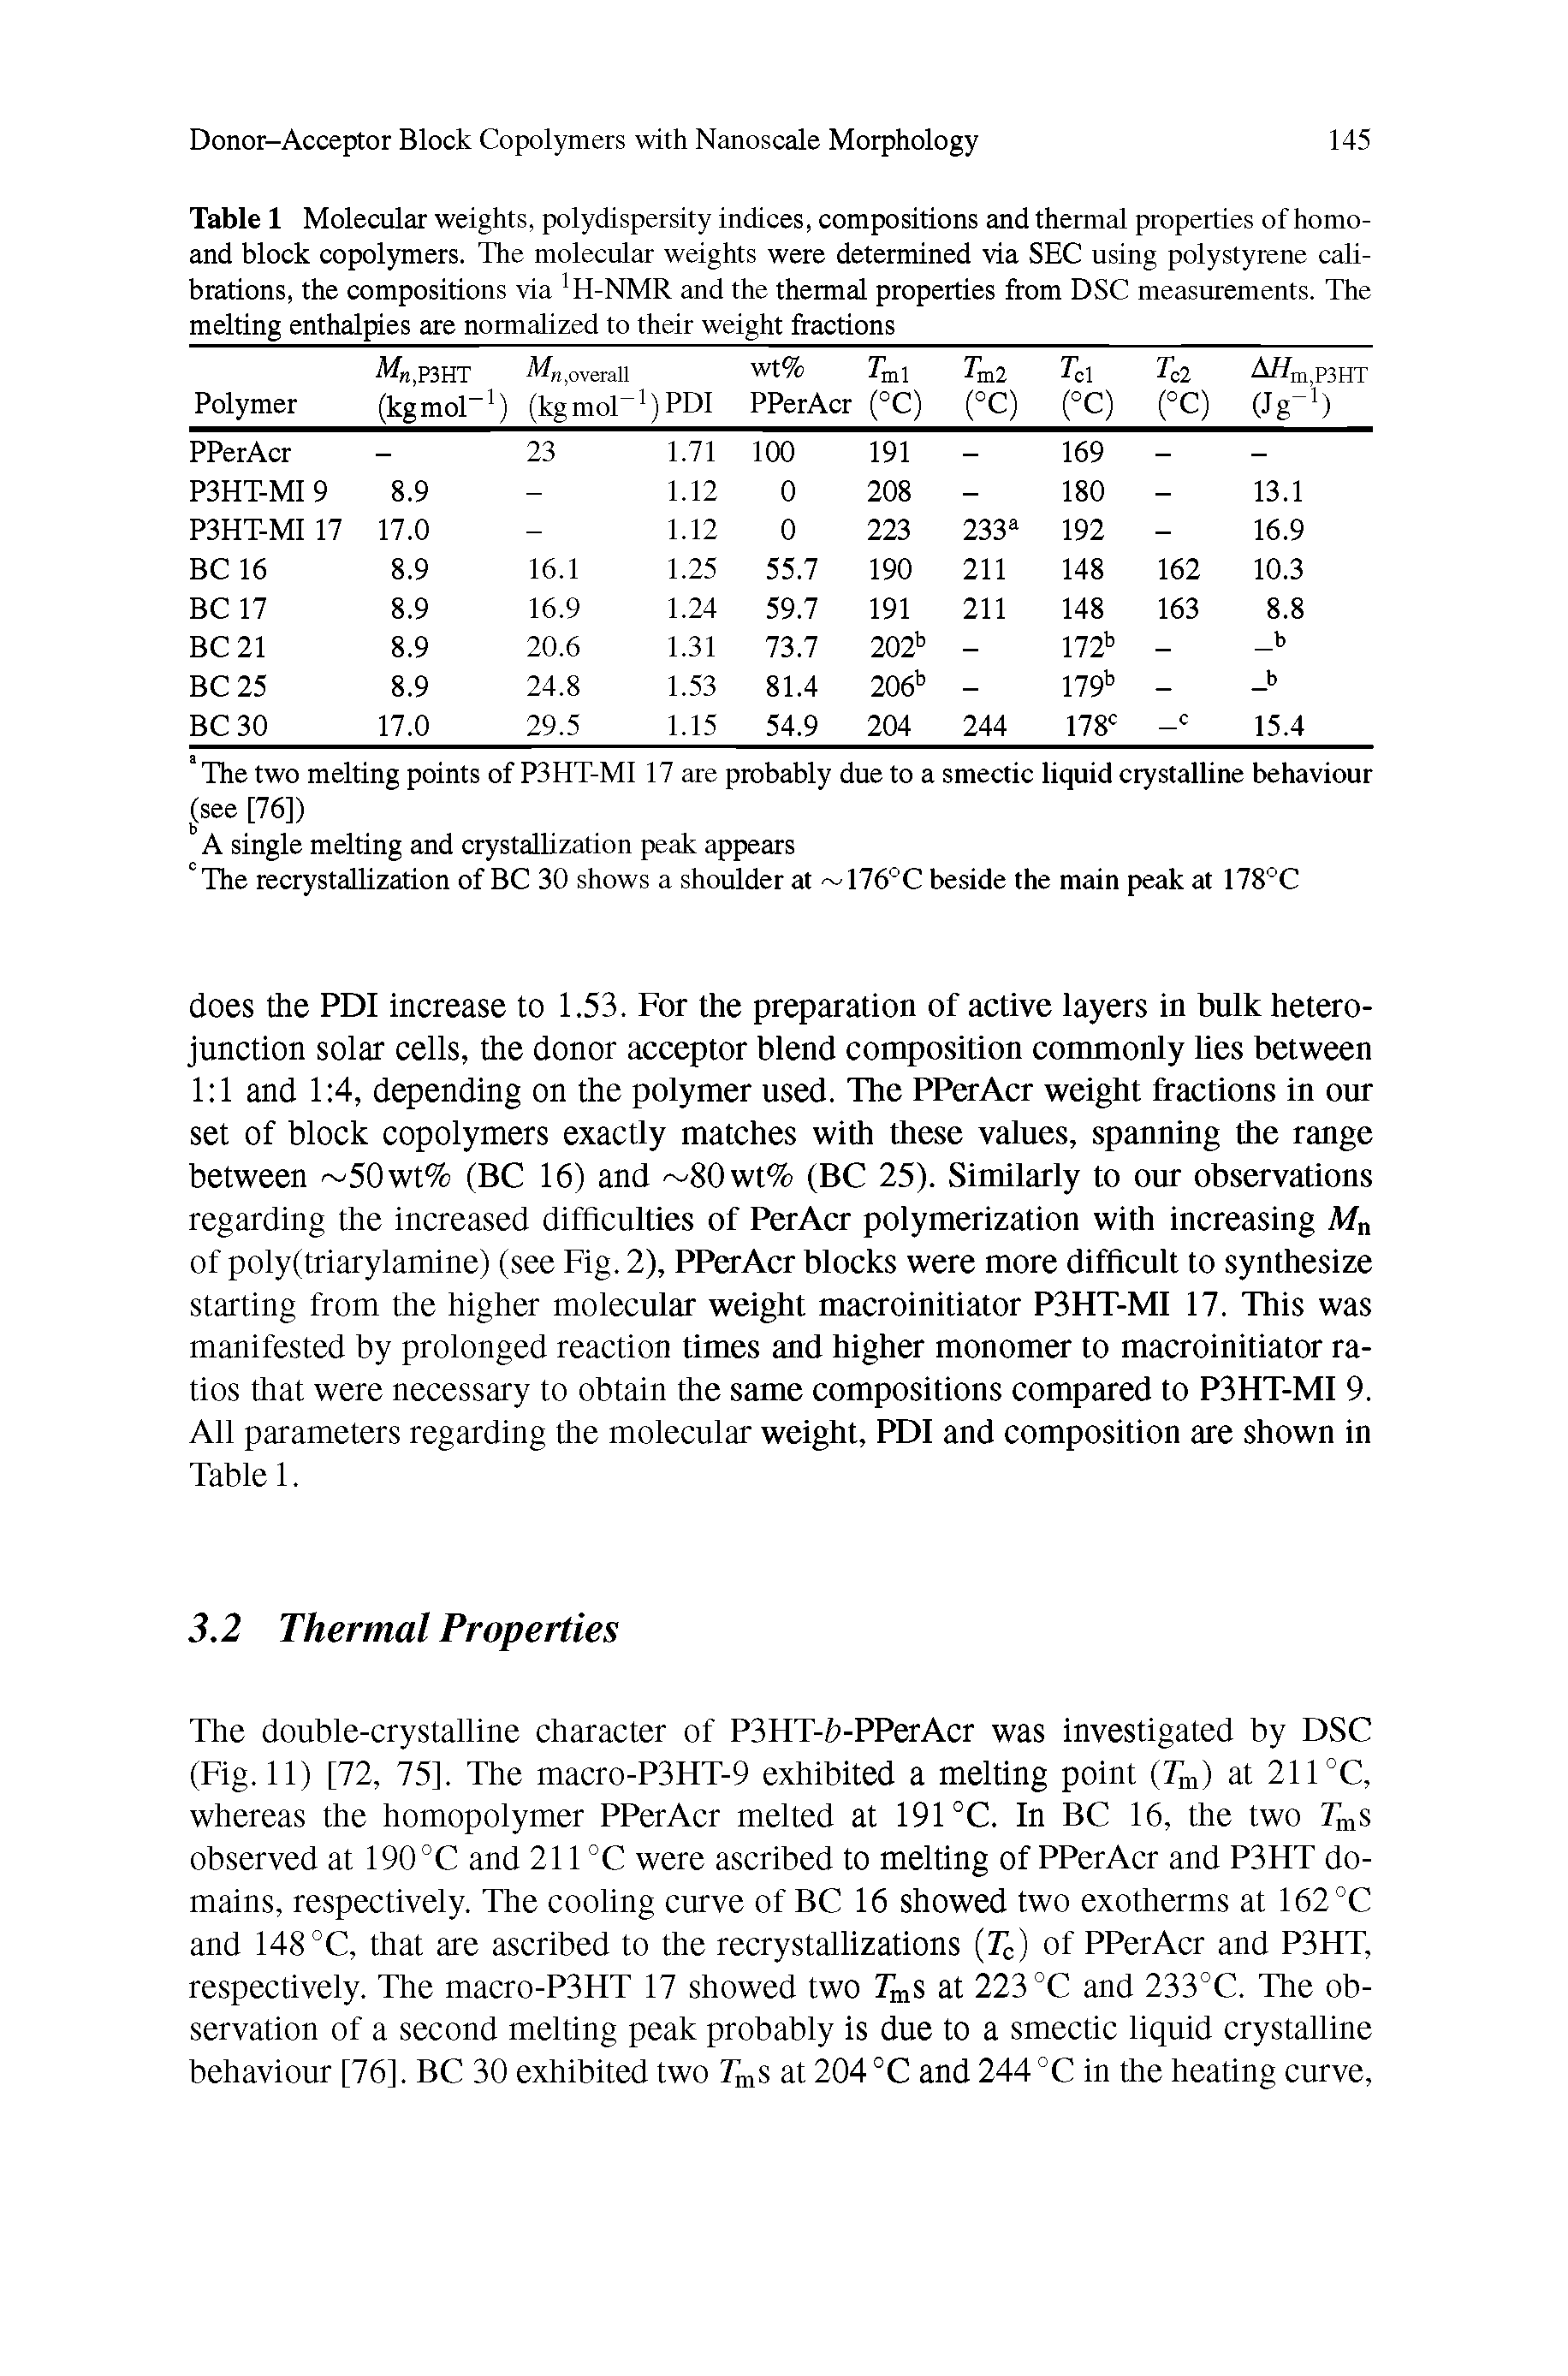 Table 1 Molecular weights, polydispersity indices, compositions and thermal properties of homo-and block copolymers. The molecular weights were determined via SEC using polystyrene calibrations, the compositions via H-NMR and the thermal properties from DSC measurements. The melting enthalpies are normalized to their weight fractions...